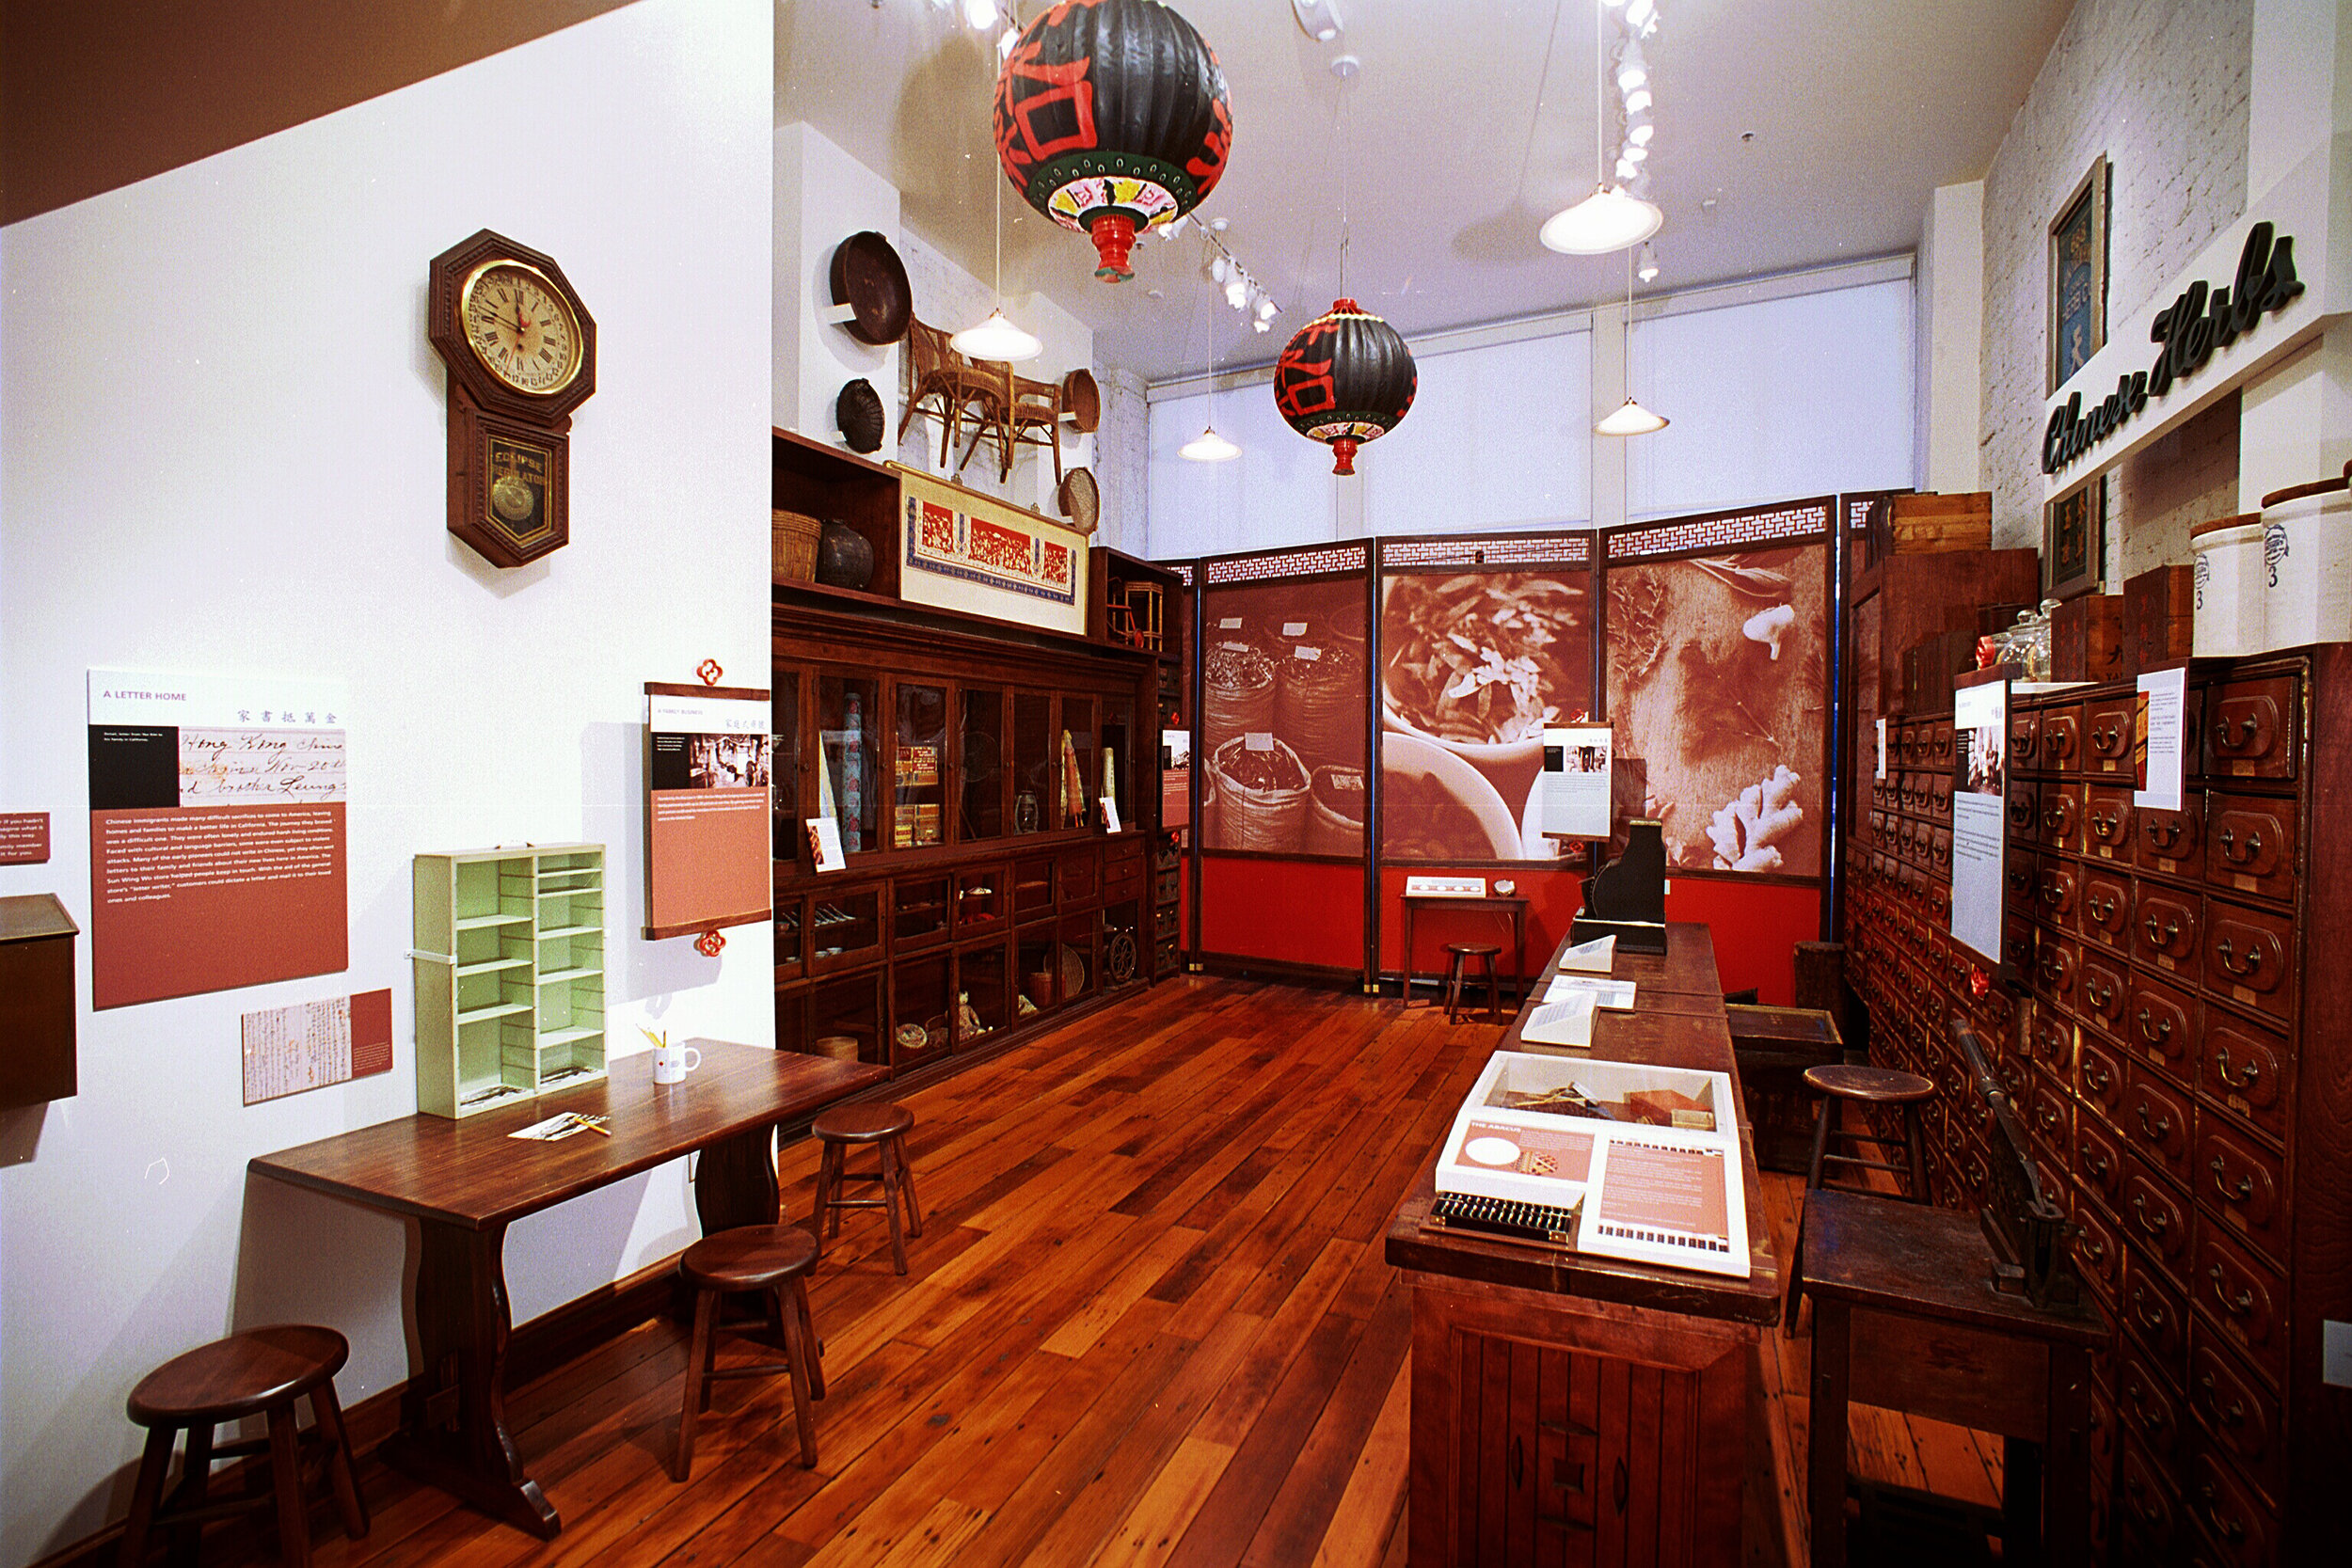 chinese american museum essay